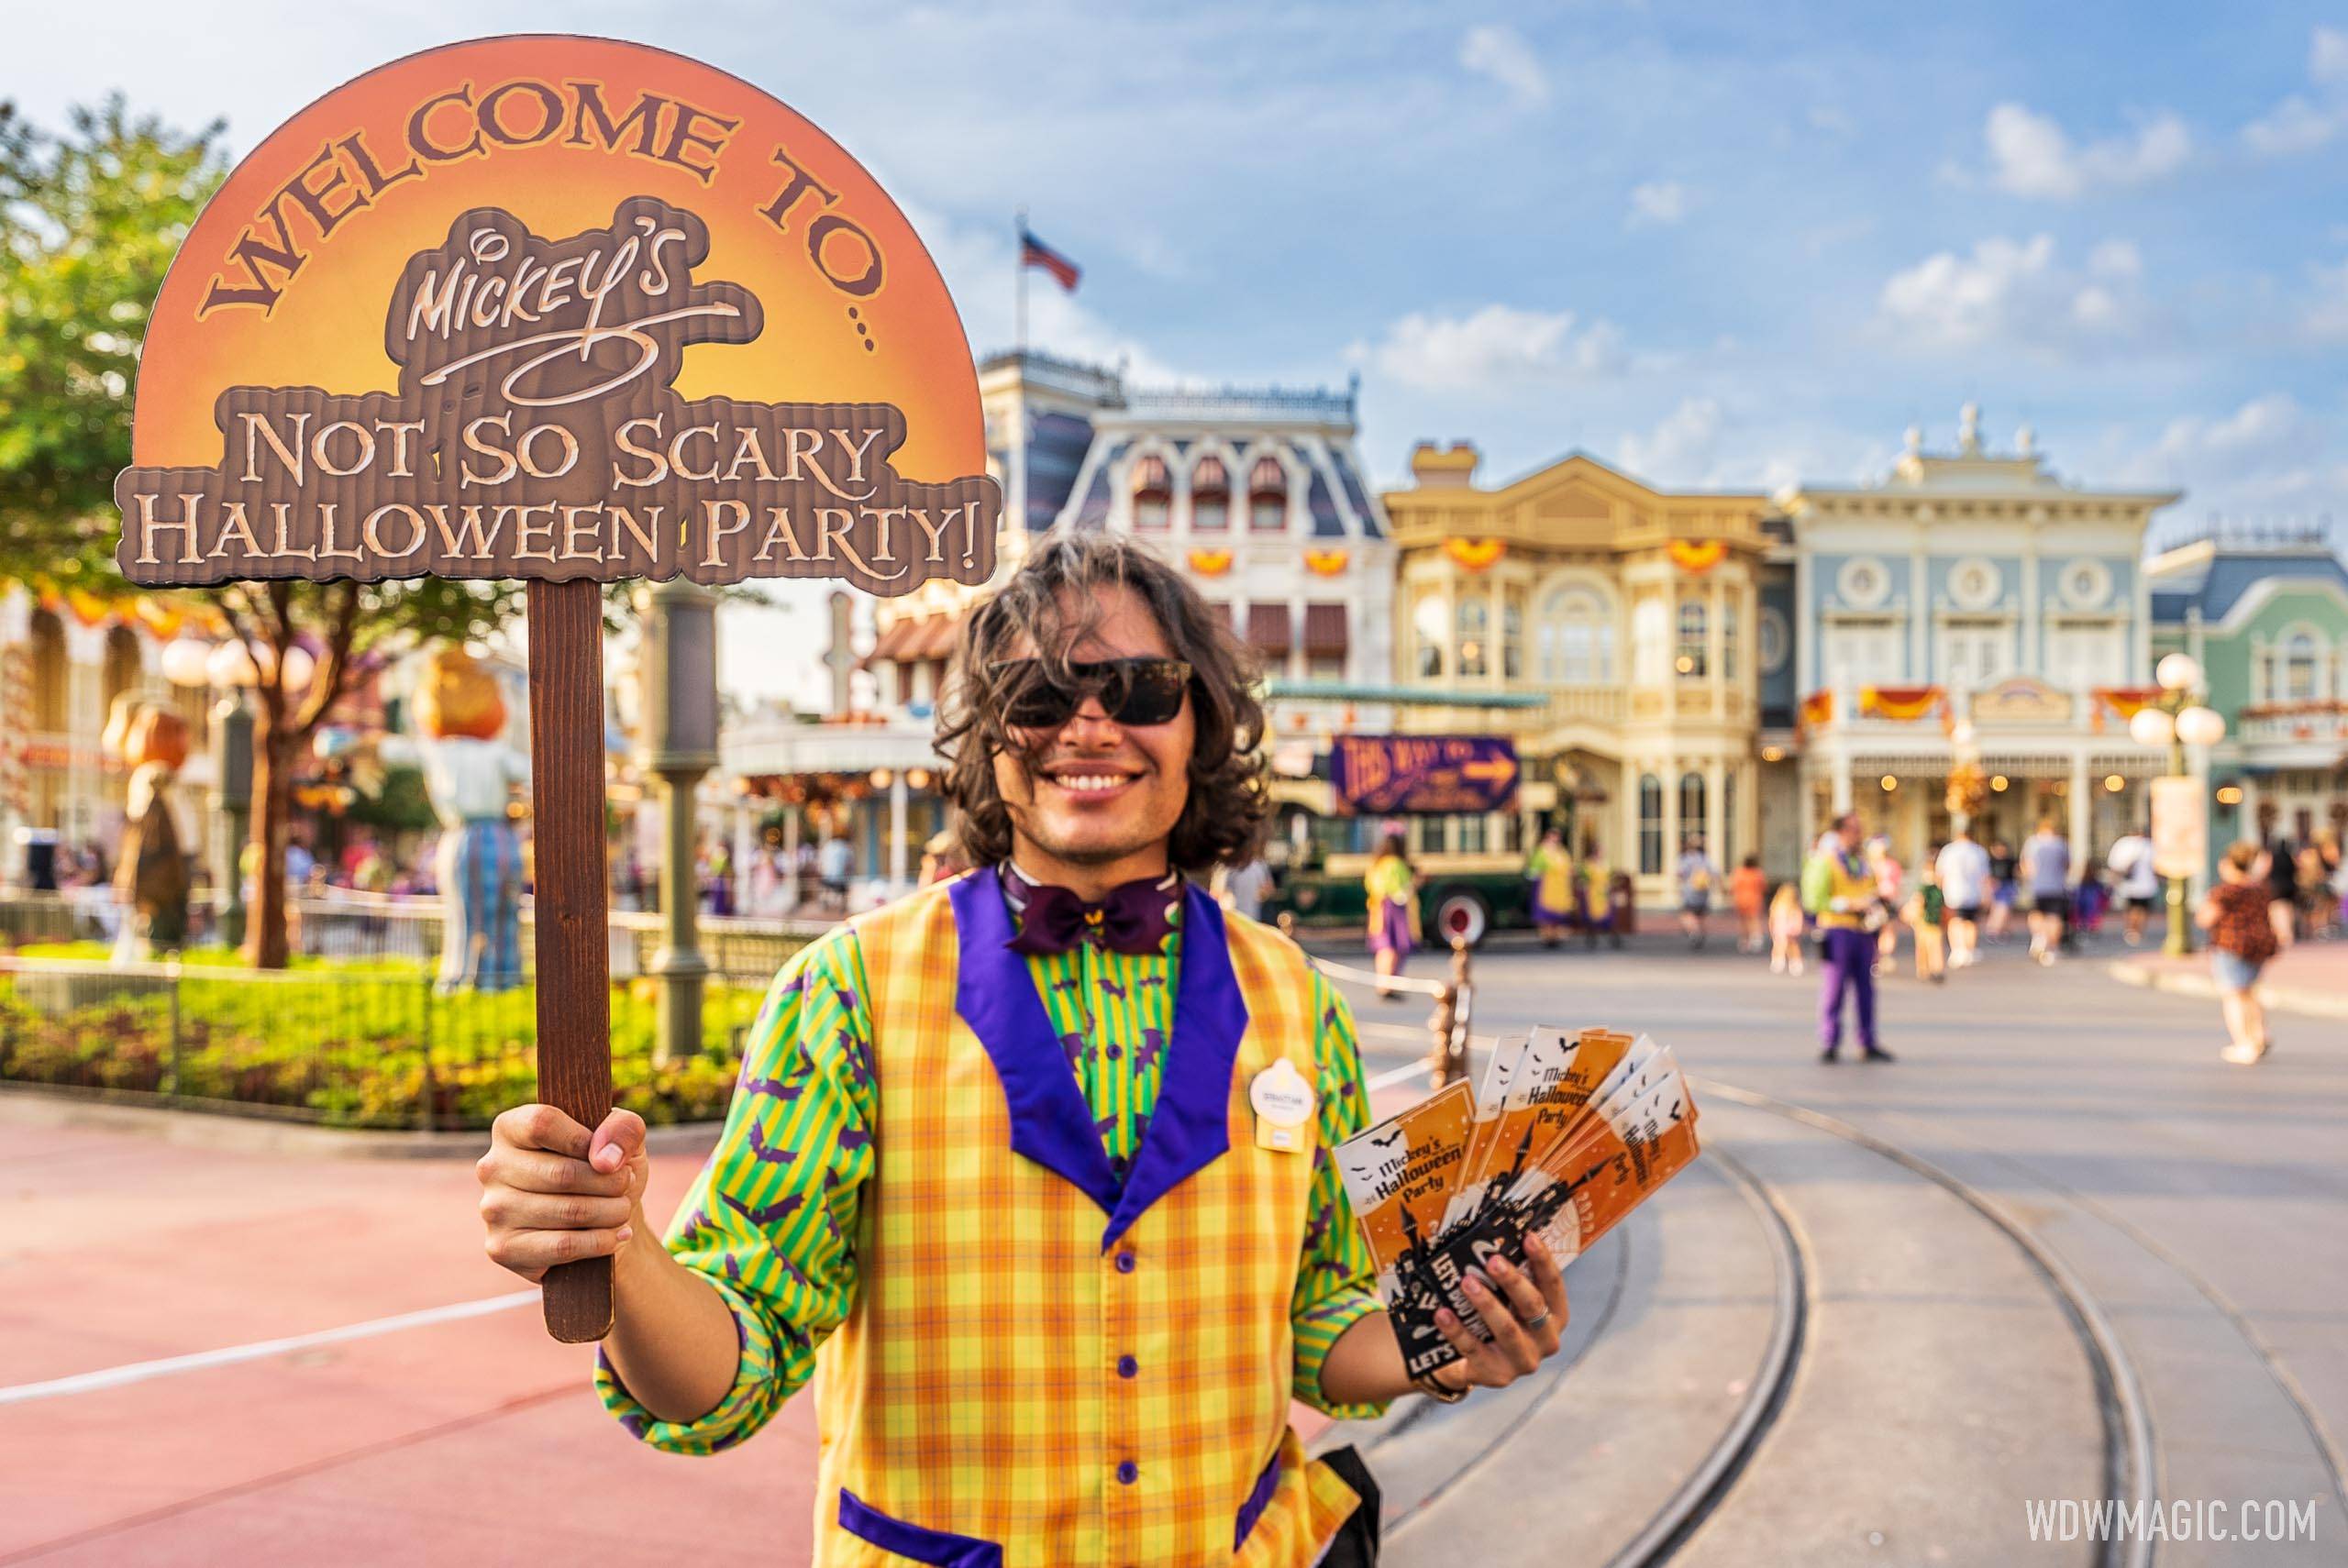 Disney World's Mickey's Not-So-Scary Halloween Party continues impressive sales with five more nights now sold out